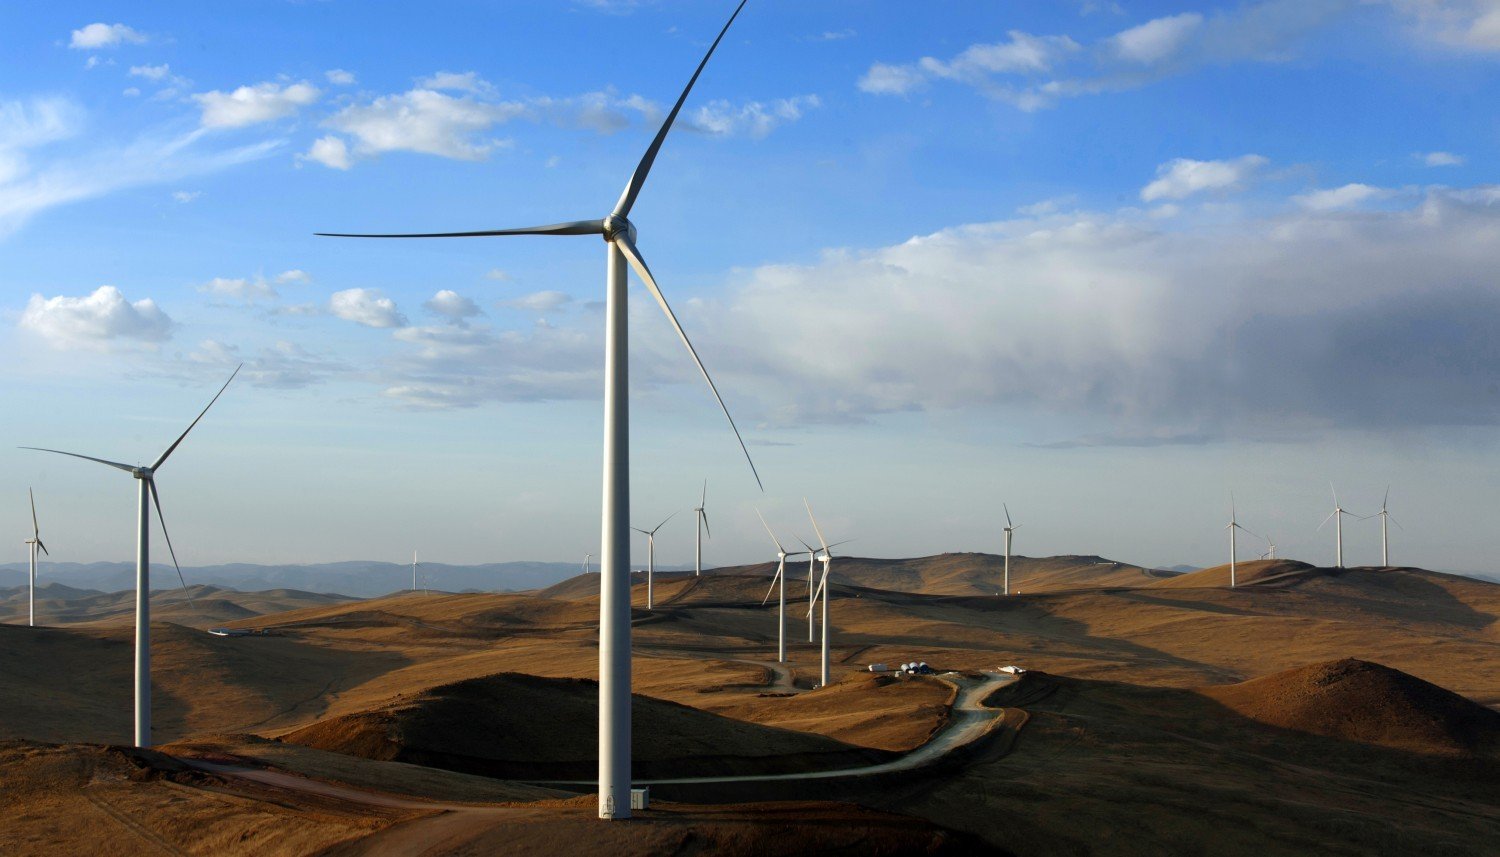 The role of government policy in the renewable energy sector: The case of Mongolia